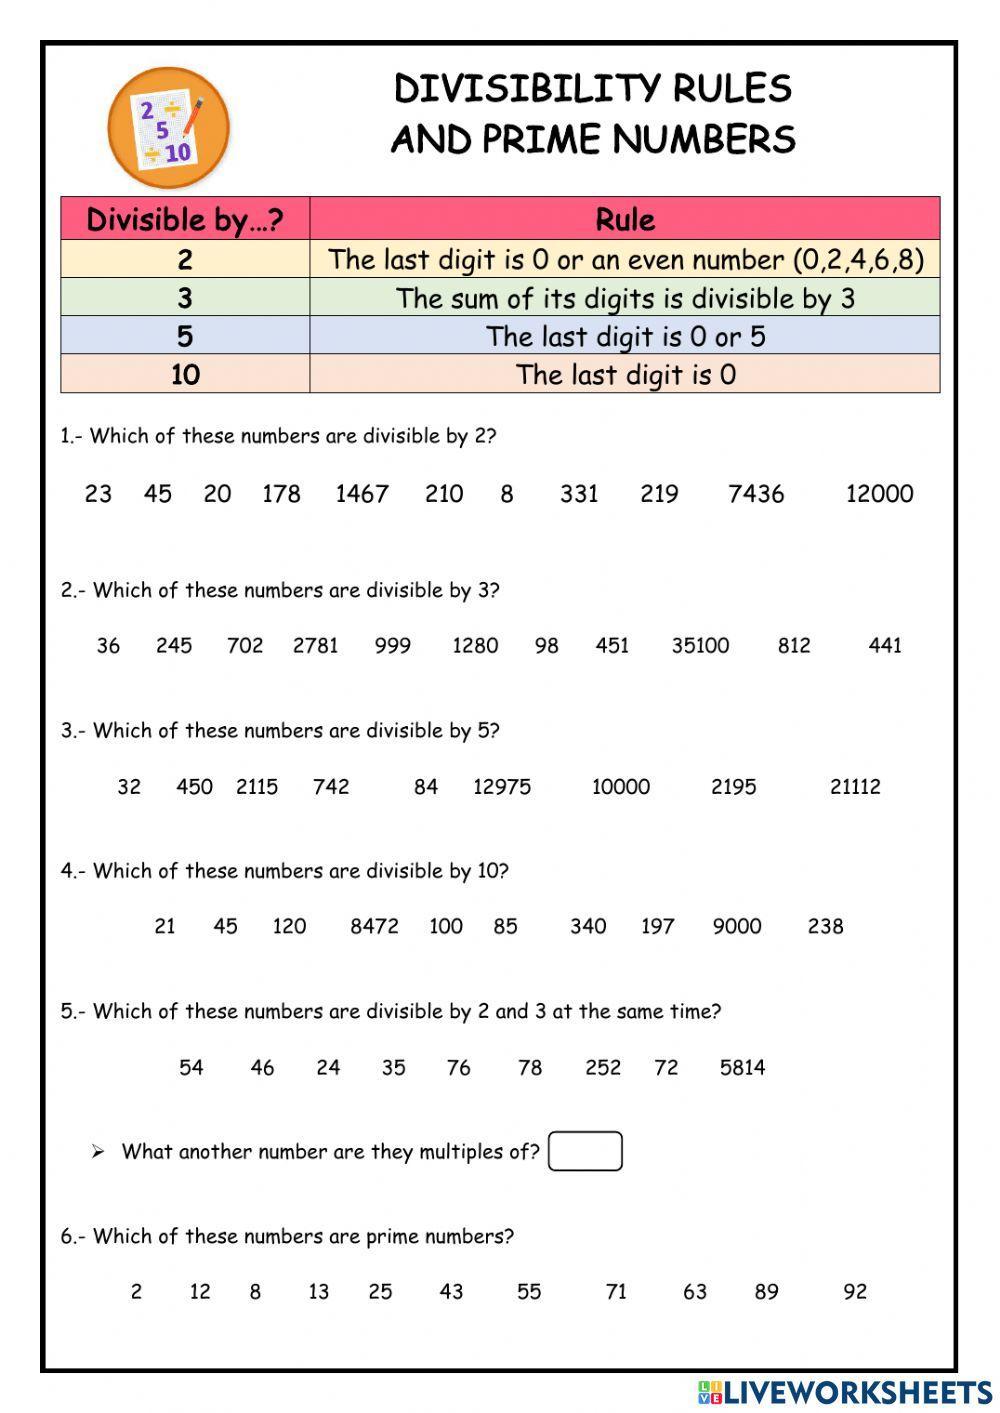 Divisibility Rules and Prime Numbers